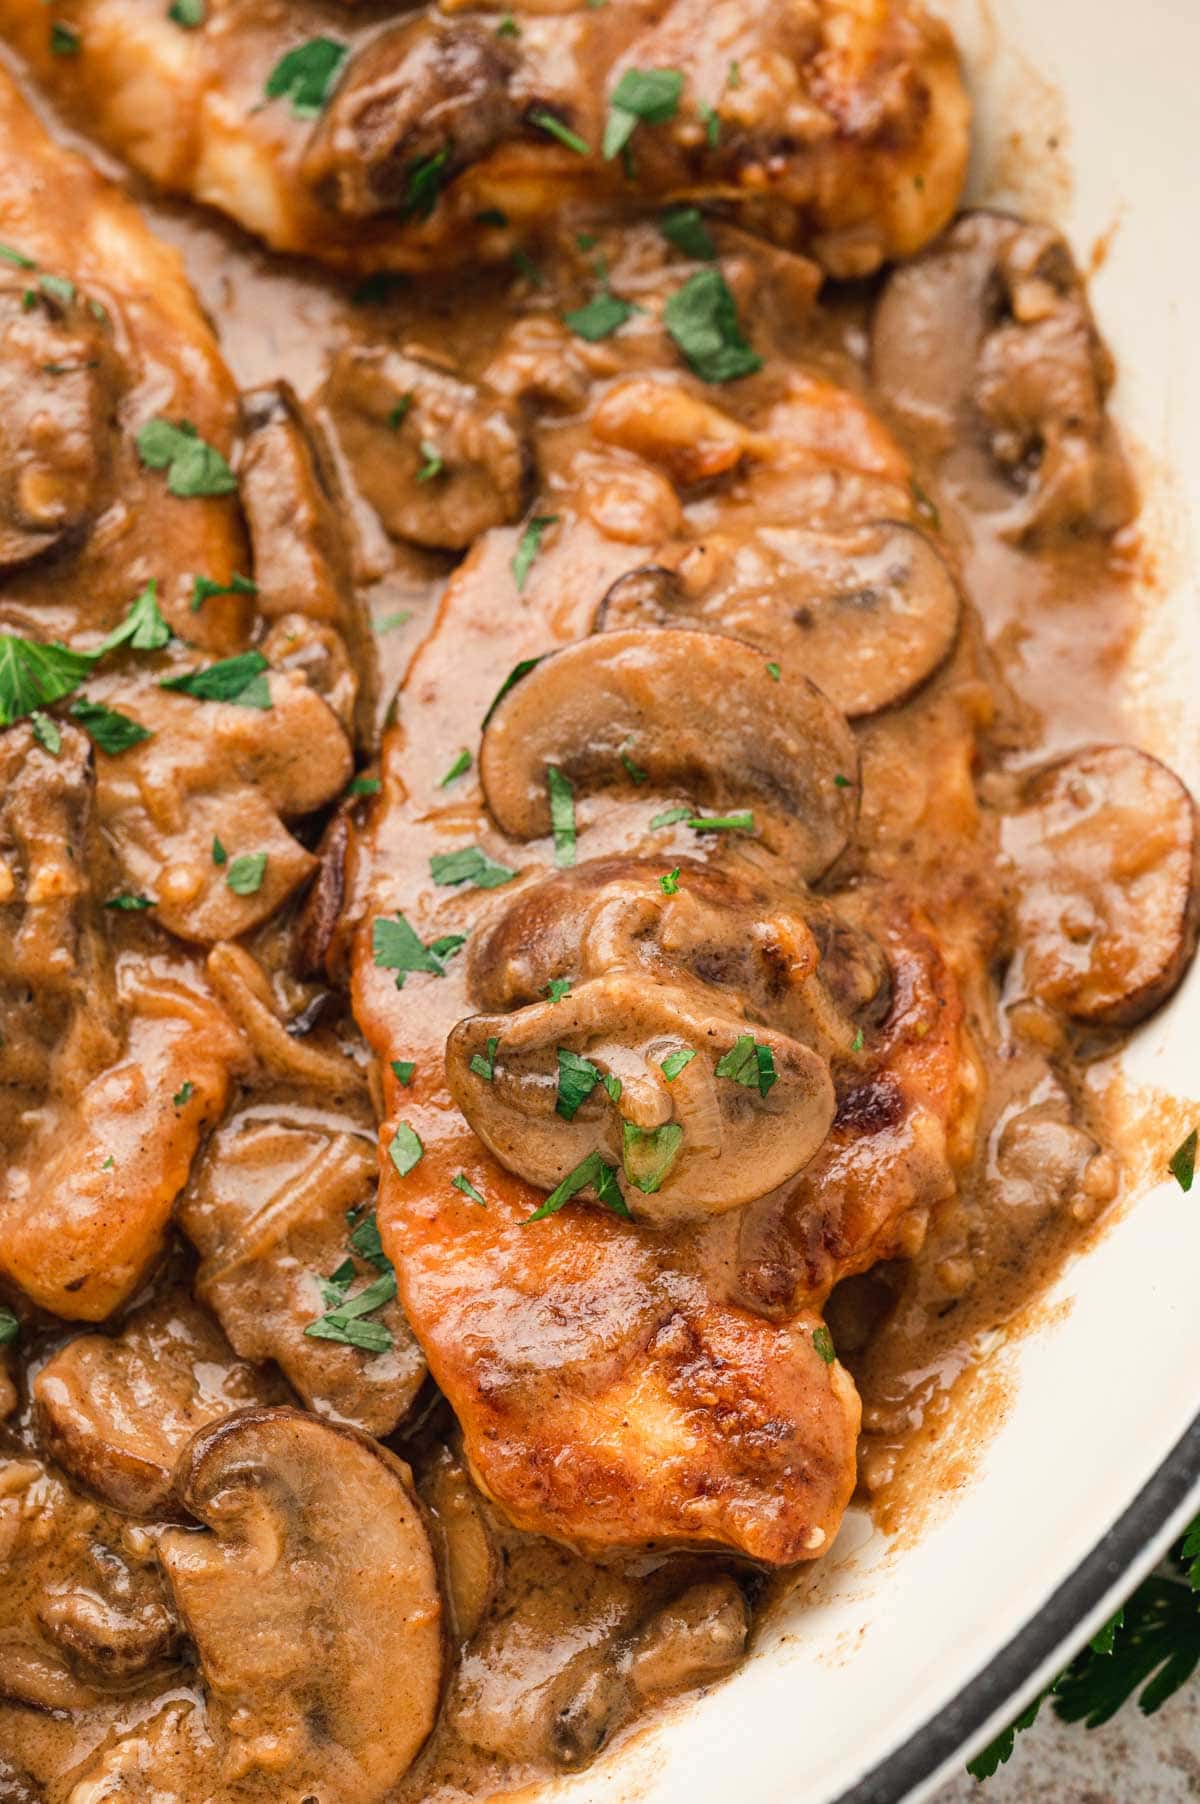 Piece of chicken breast in a brown sauce with mushrooms.